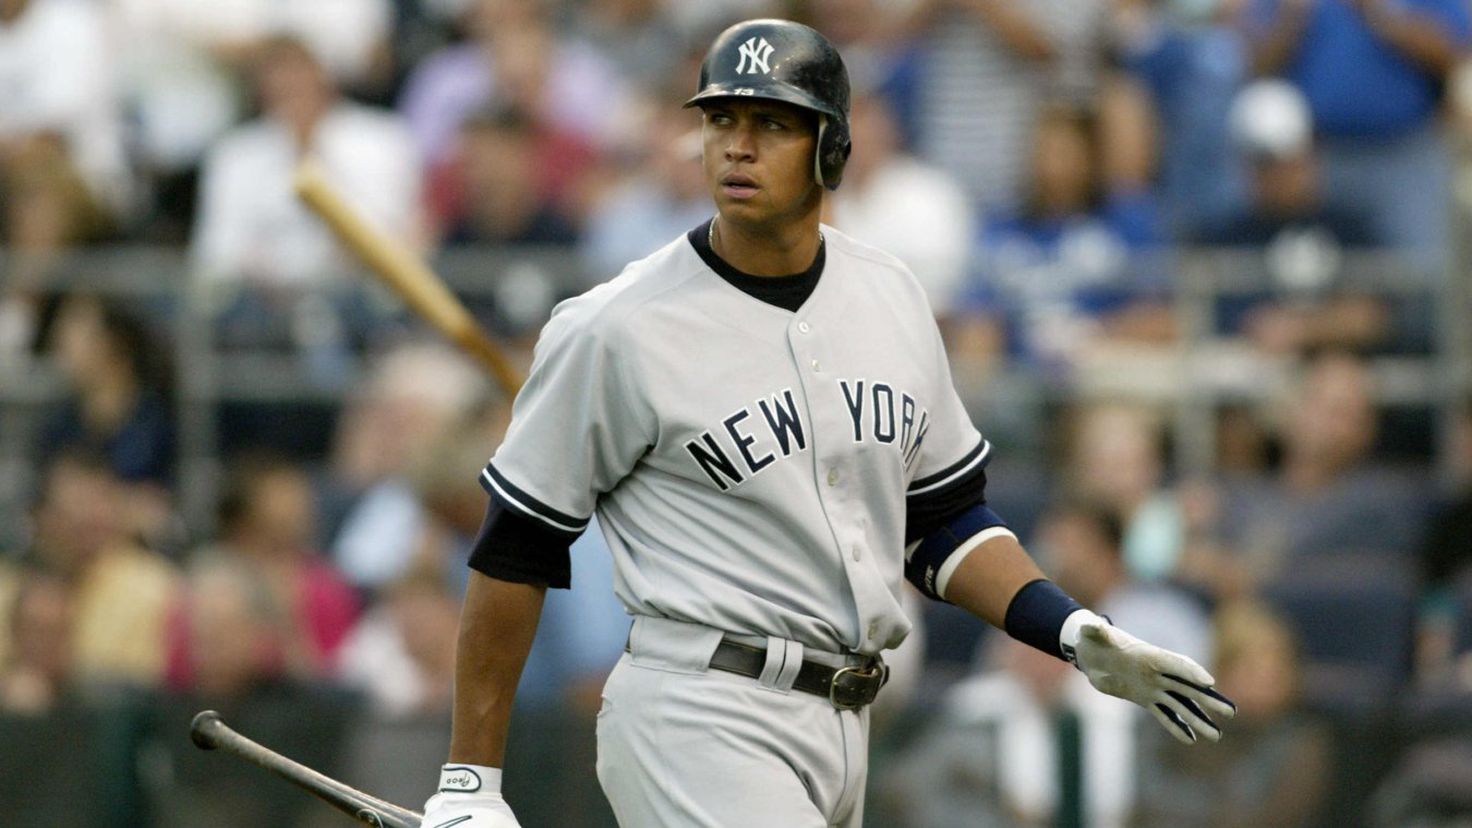 The unexpected illness suffered by Alex Rodríguez, former Yankees player
